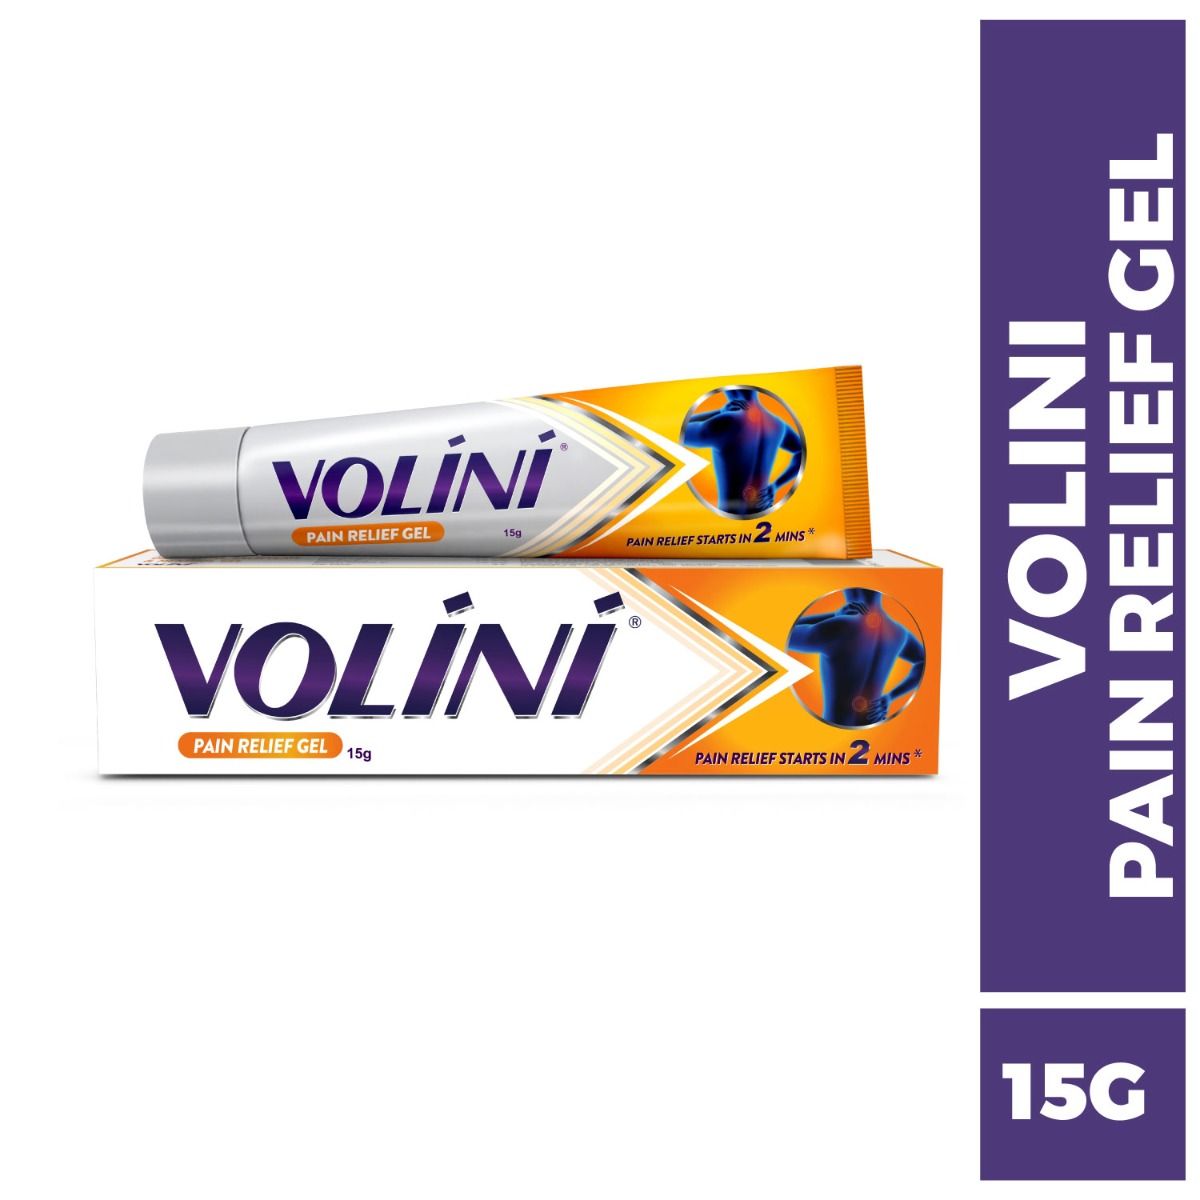 Volini Pain Relief Gel, 15 gm Price, Uses, Side Effects ...